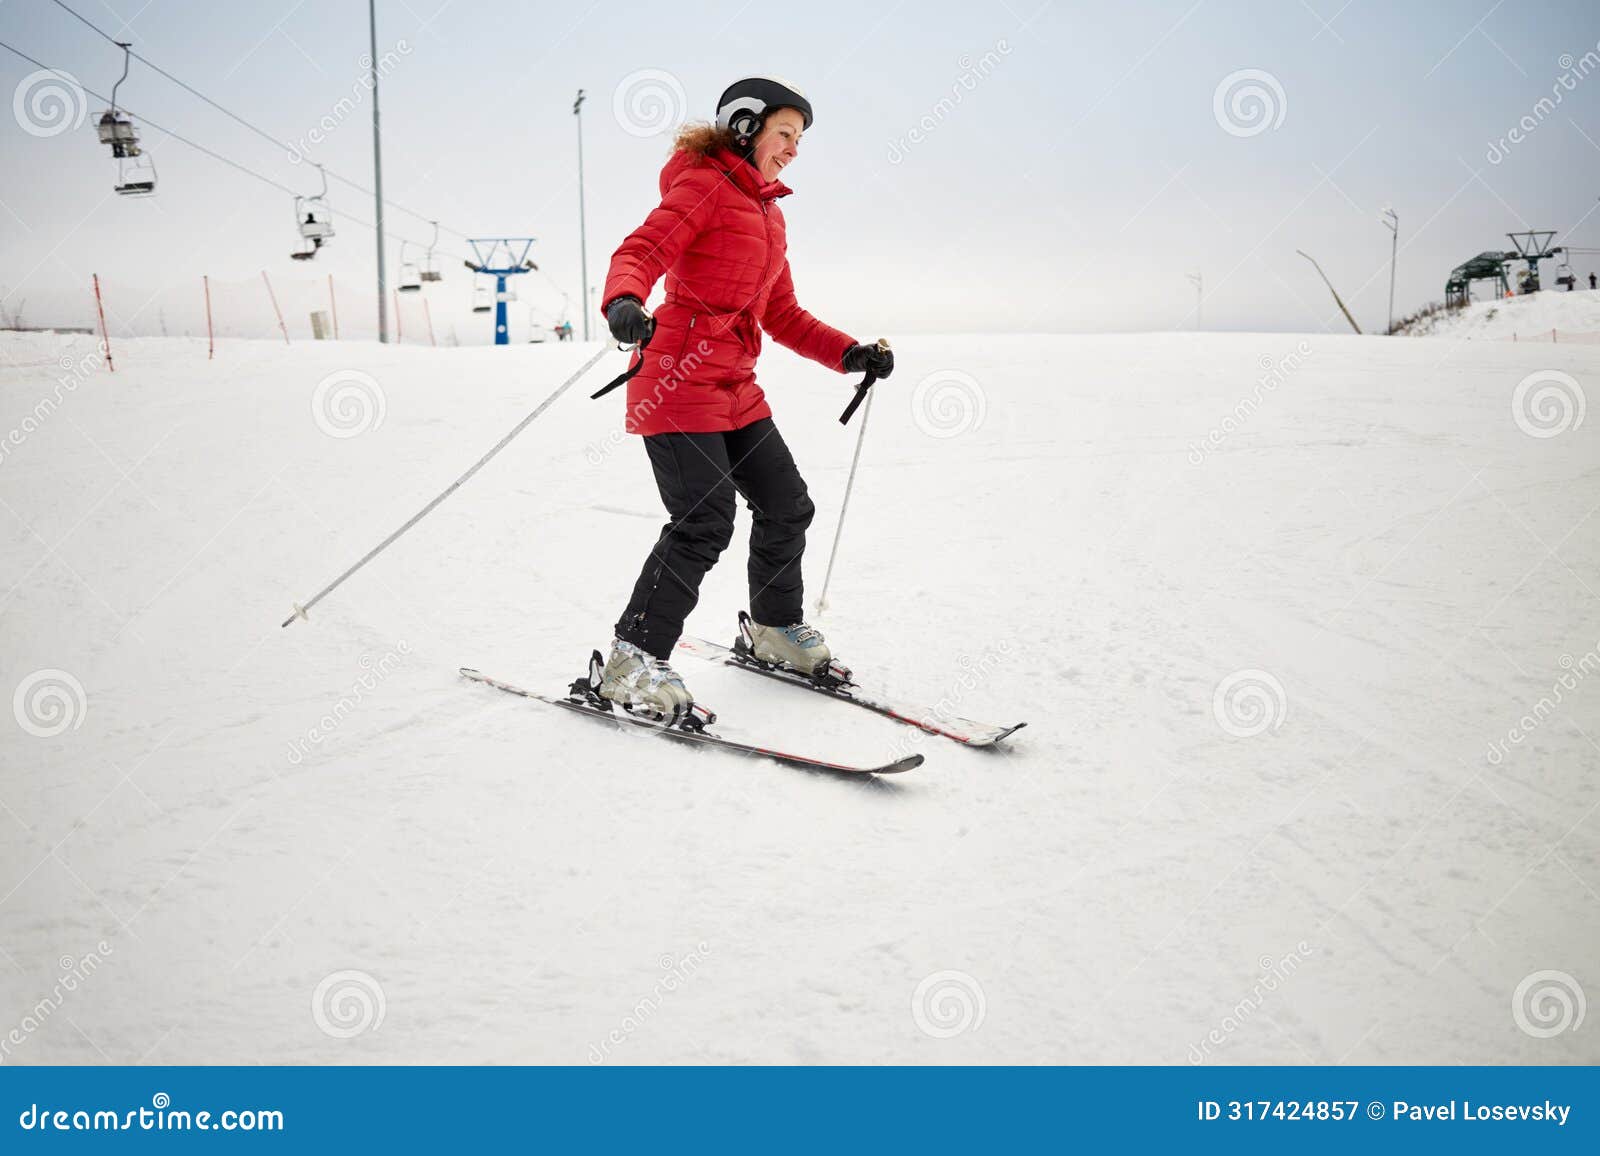 woman skis on slope in winter day at sports